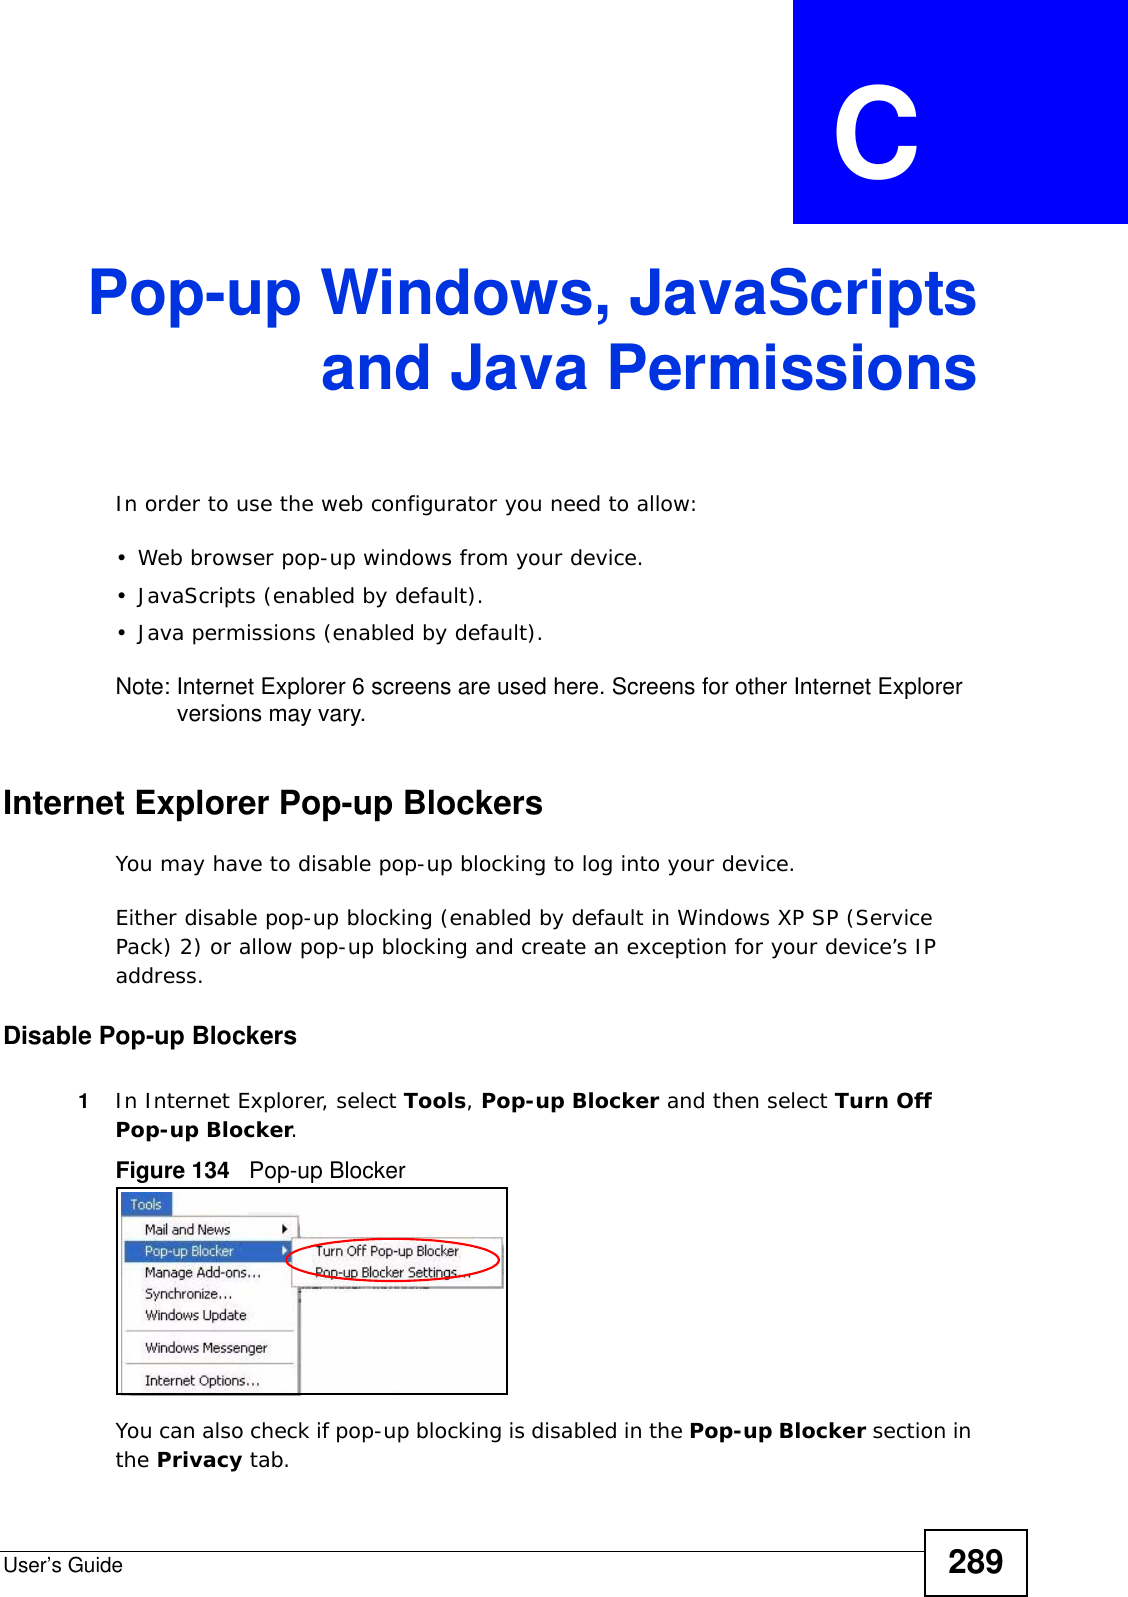 User’s Guide 289APPENDIX  C Pop-up Windows, JavaScriptsand Java PermissionsIn order to use the web configurator you need to allow:• Web browser pop-up windows from your device.• JavaScripts (enabled by default).• Java permissions (enabled by default).Note: Internet Explorer 6 screens are used here. Screens for other Internet Explorer versions may vary.Internet Explorer Pop-up BlockersYou may have to disable pop-up blocking to log into your device. Either disable pop-up blocking (enabled by default in Windows XP SP (Service Pack) 2) or allow pop-up blocking and create an exception for your device’s IP address.Disable Pop-up Blockers1In Internet Explorer, select Tools, Pop-up Blocker and then select Turn Off Pop-up Blocker. Figure 134   Pop-up BlockerYou can also check if pop-up blocking is disabled in the Pop-up Blocker section in the Privacy tab. 